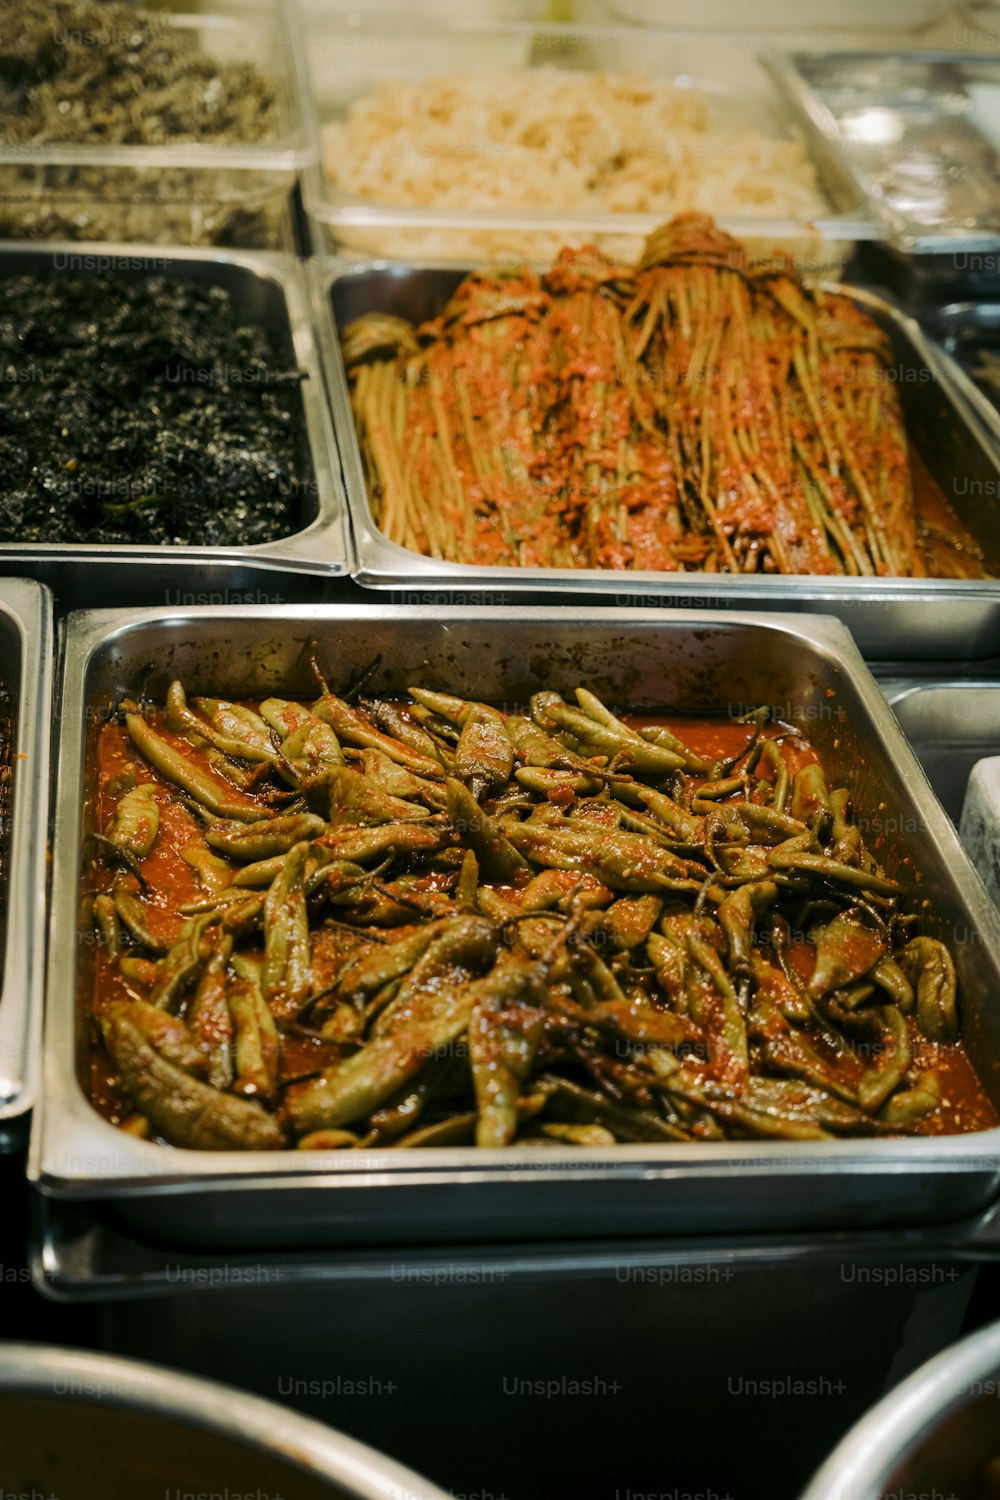 a variety of foods are displayed in trays